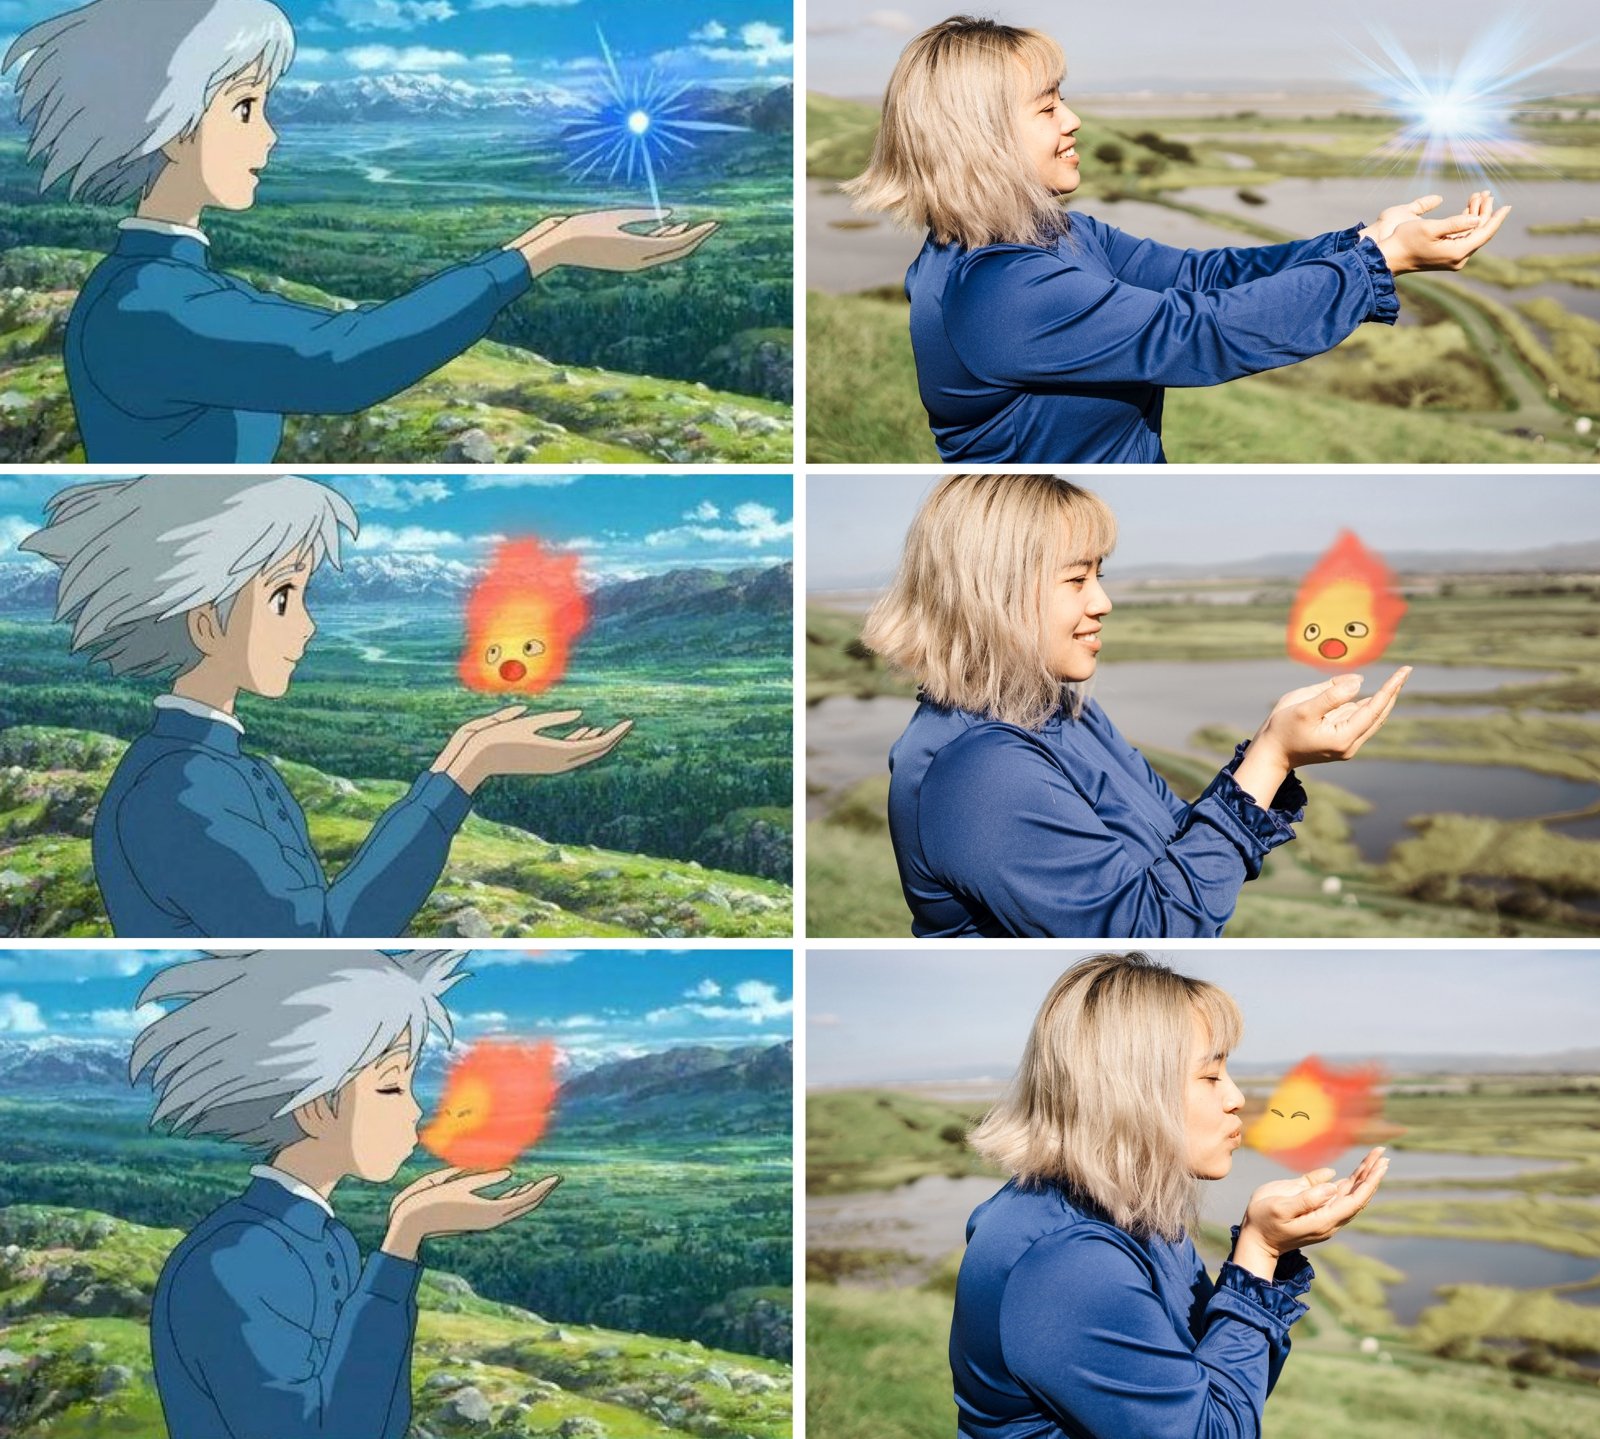 howl's moving castle sophie cosplay photoshoot bay area cosplay photographer 22.jpg